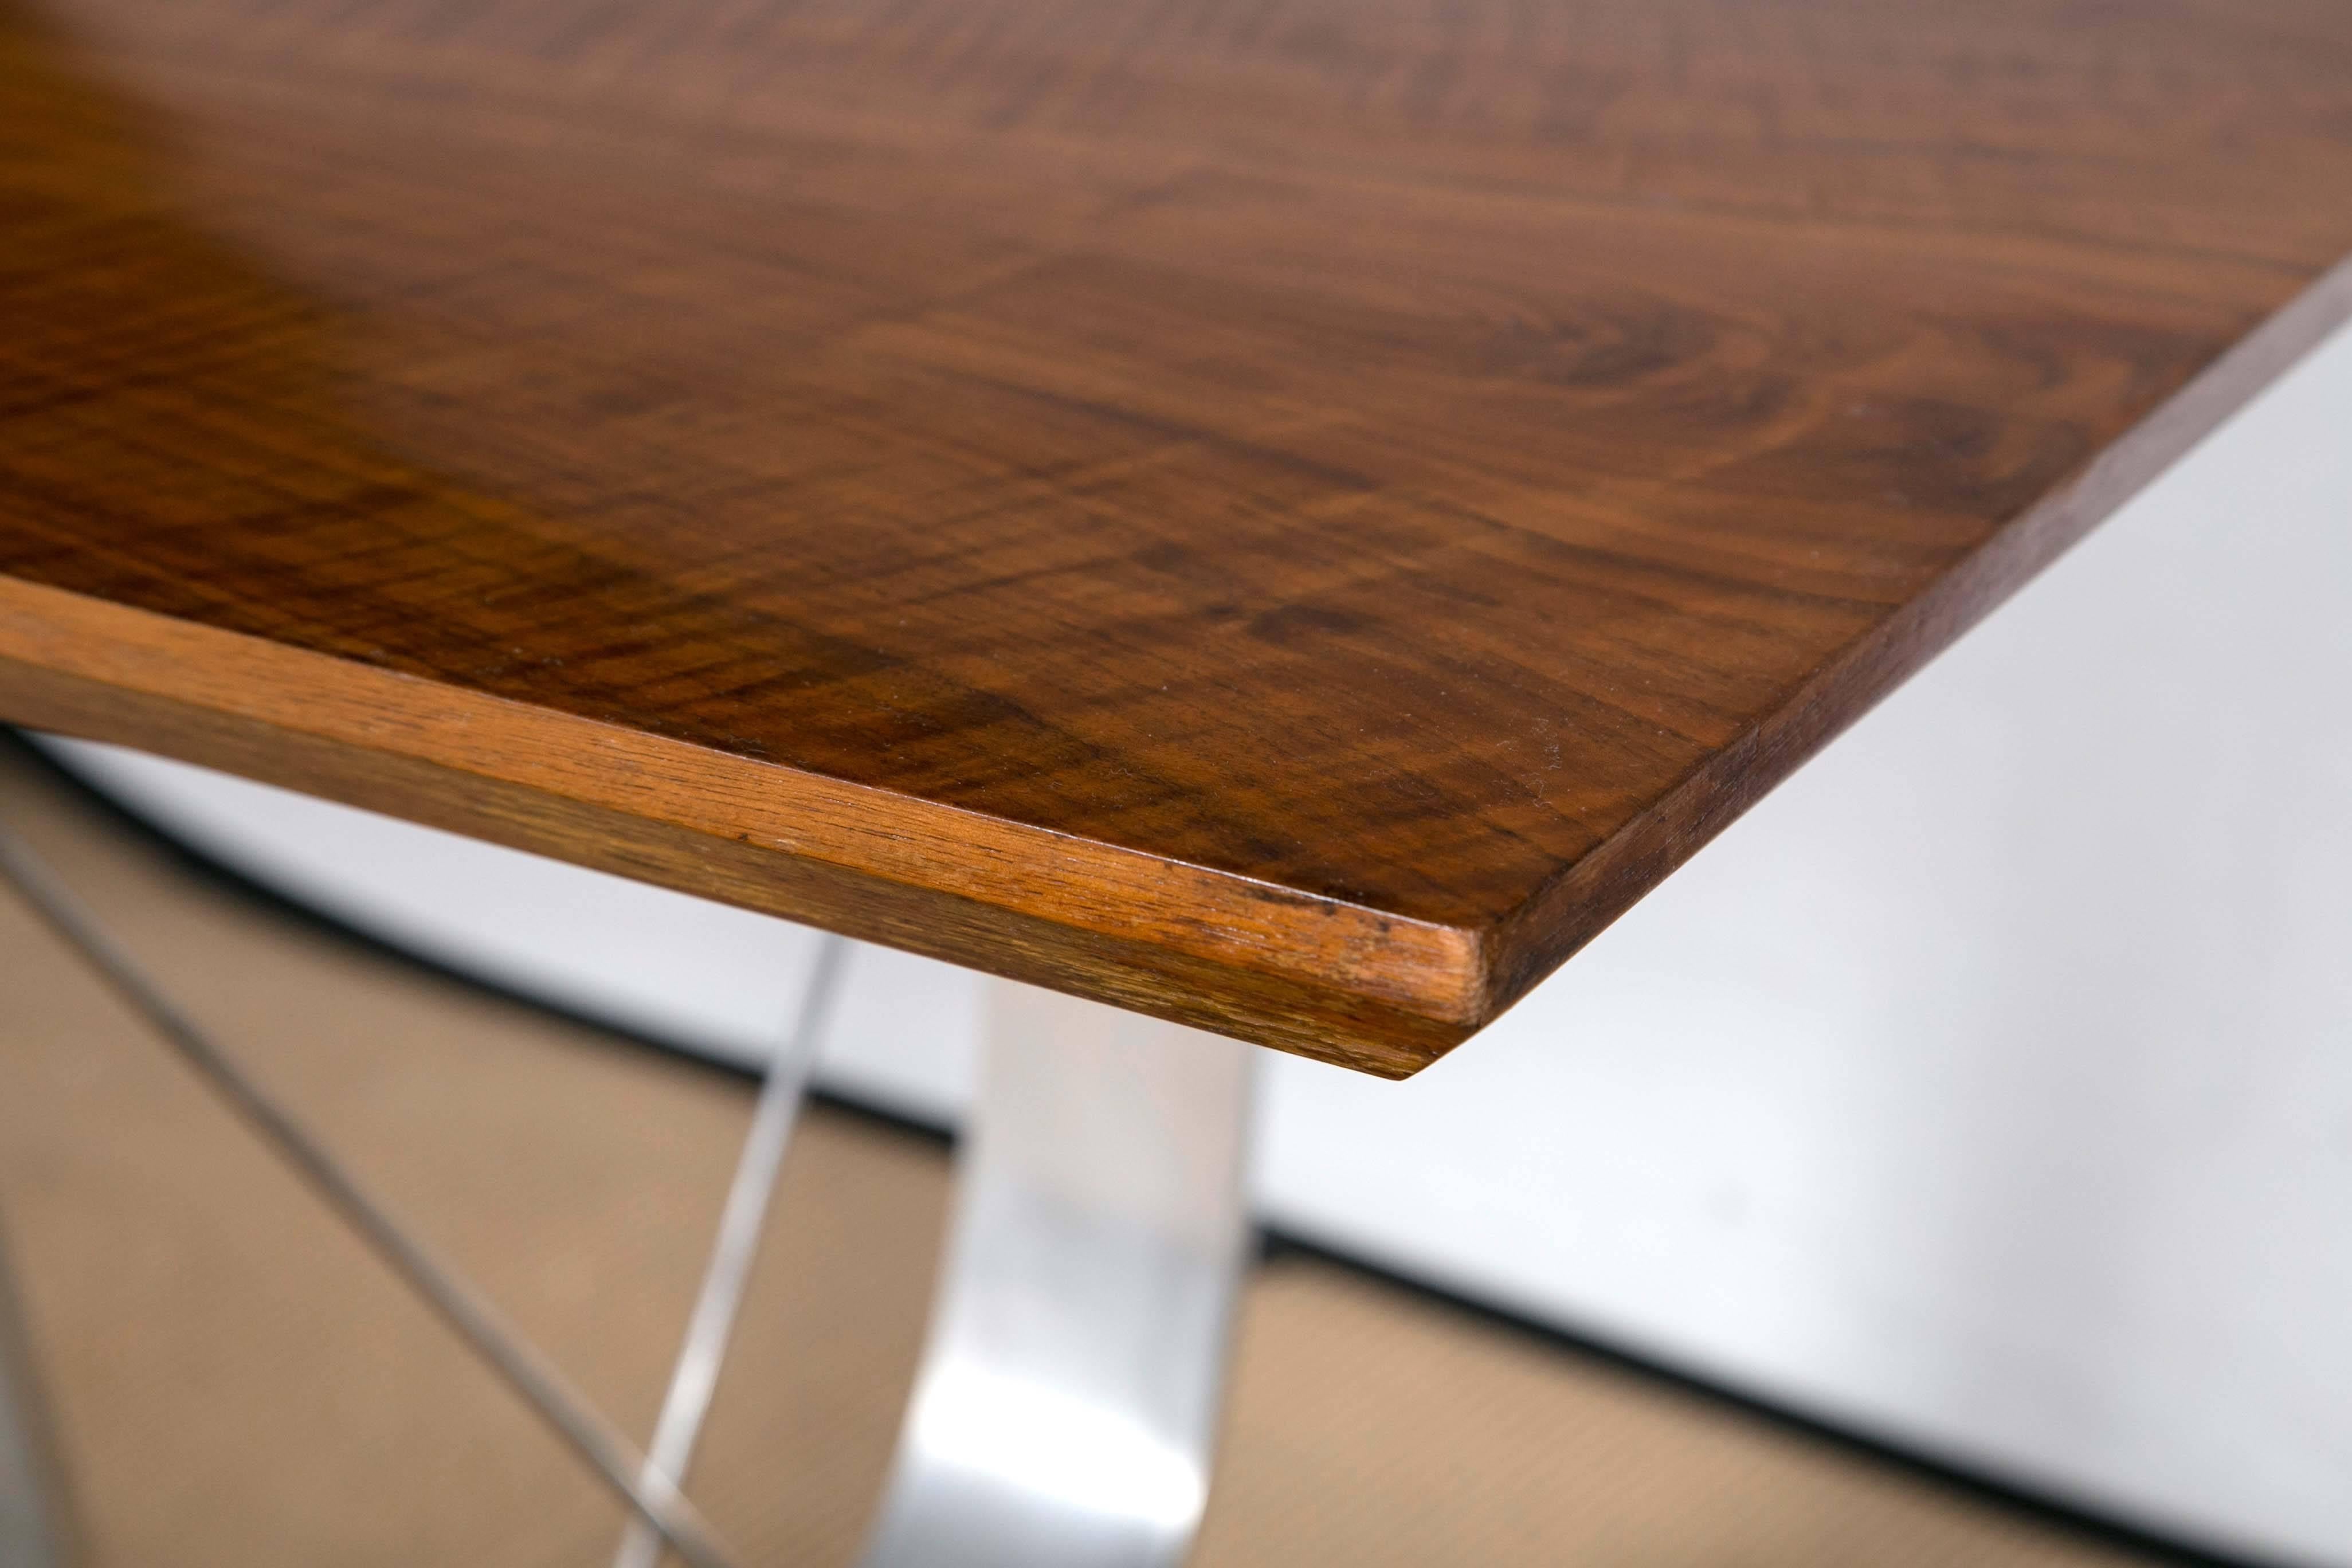 Stunning Donald Deskey dining table could also function as a stylish table desk.